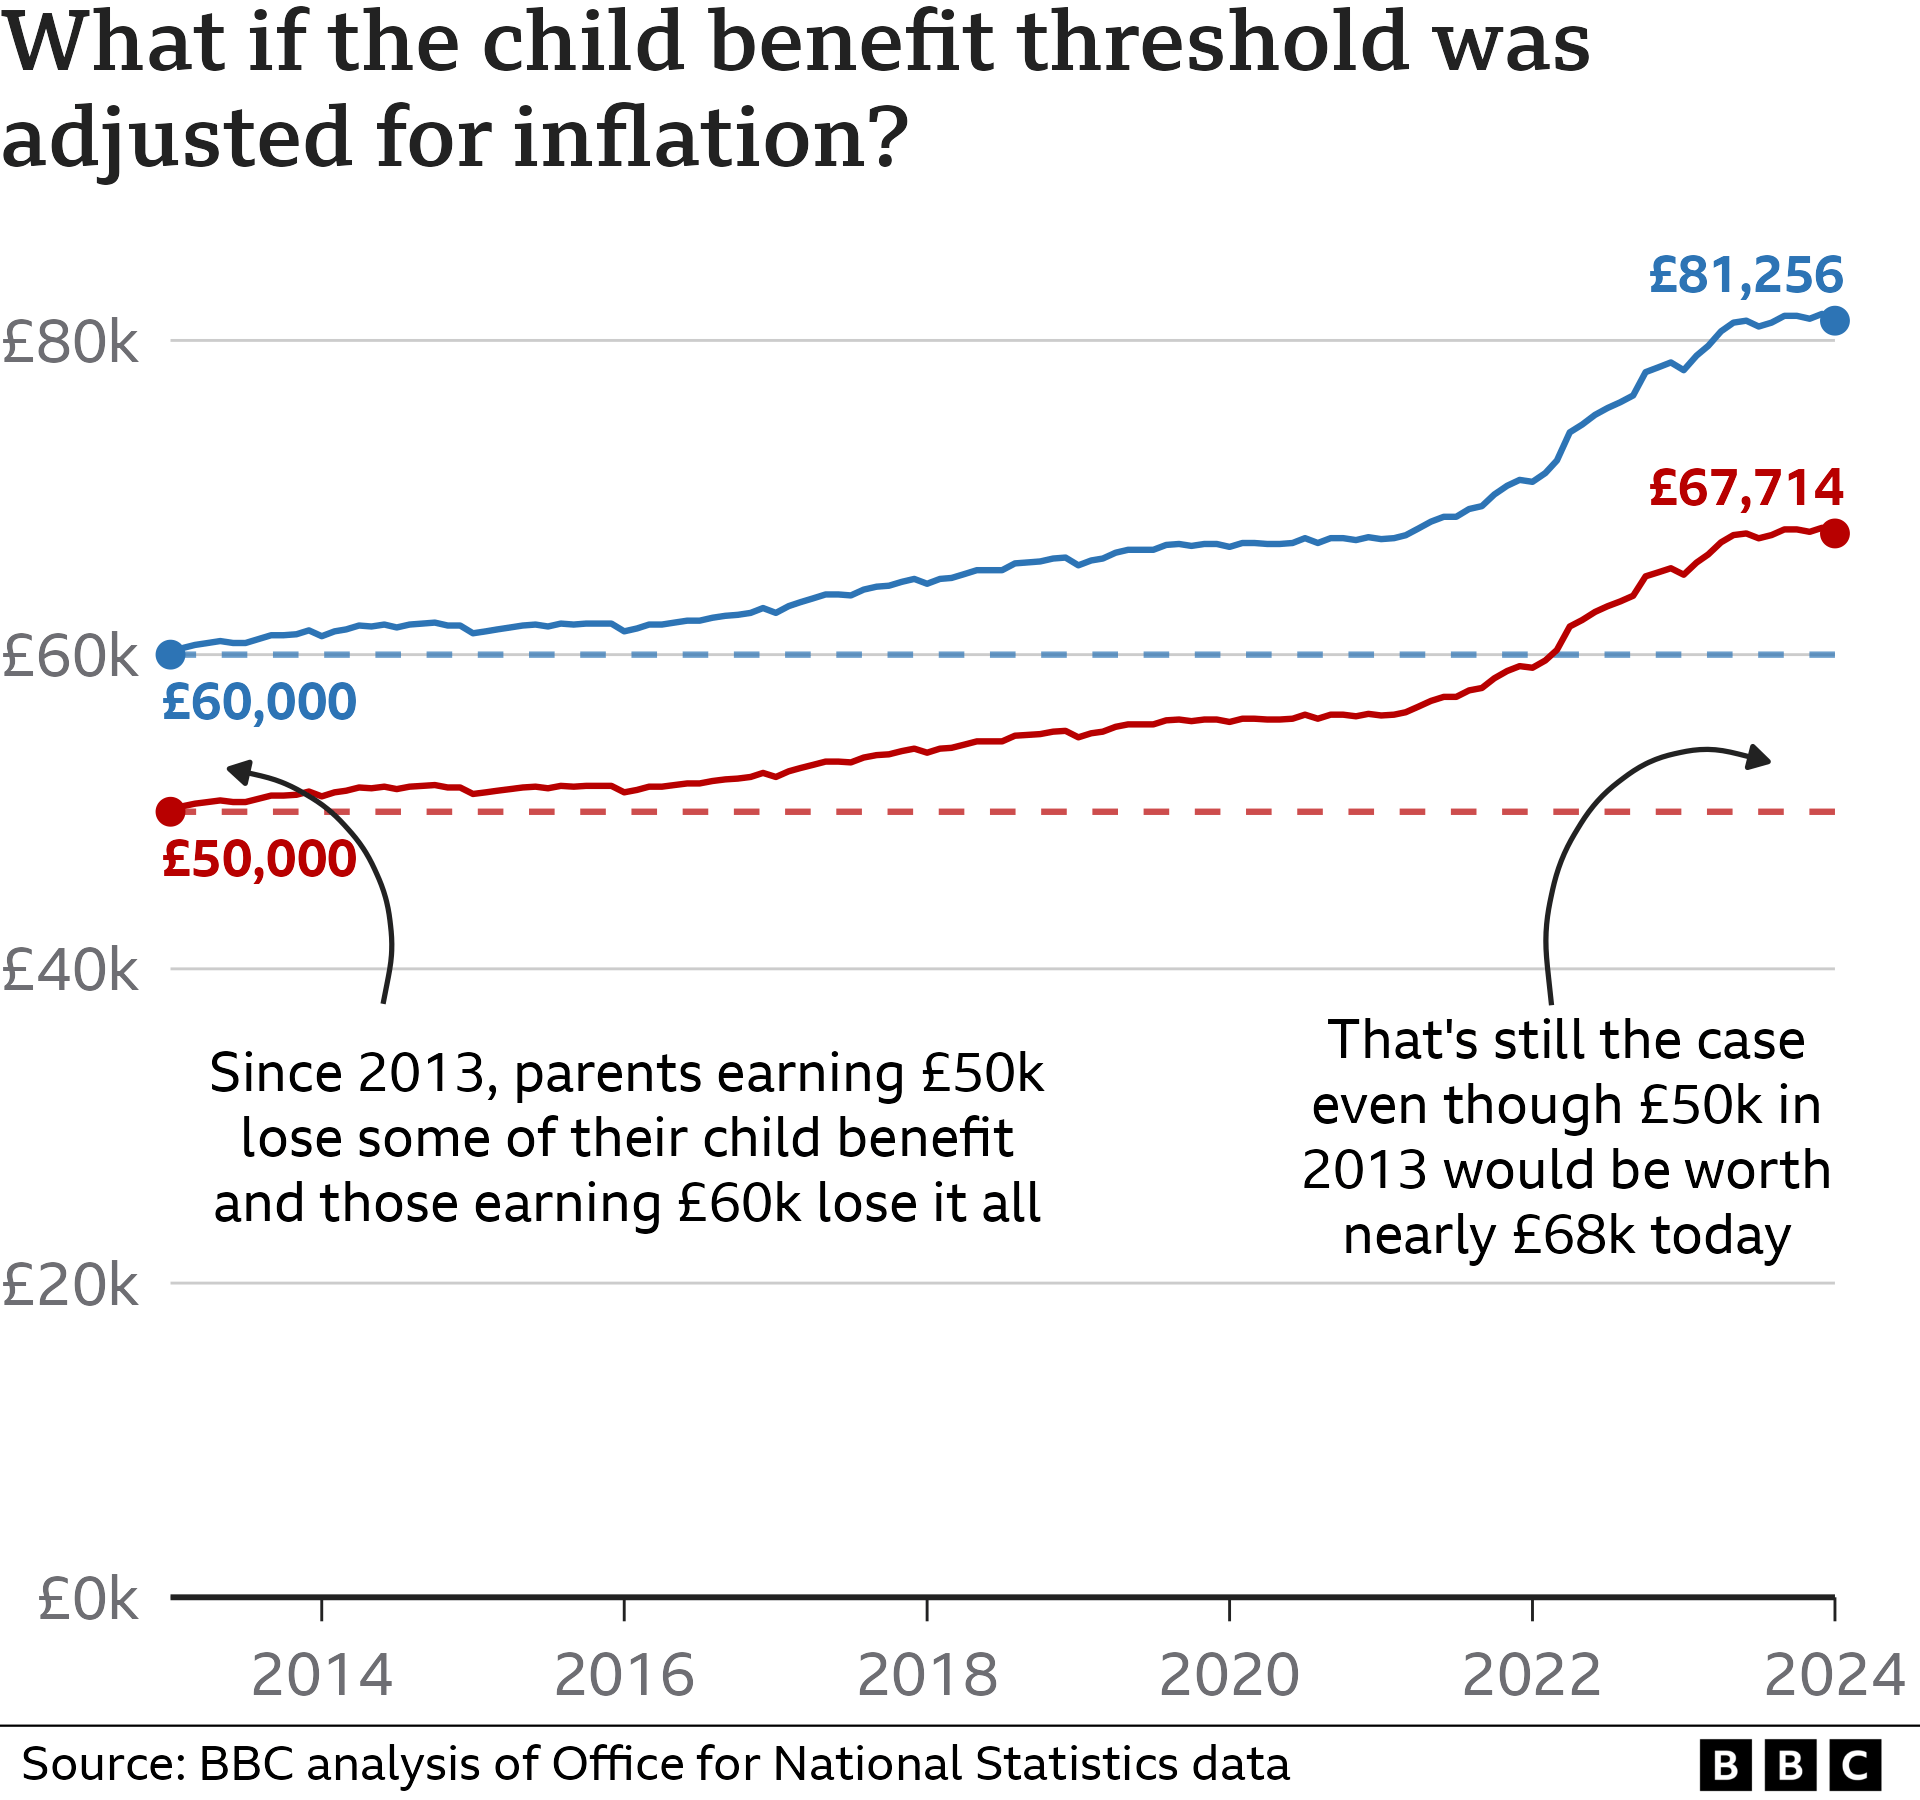 Two lines show that £60,000 in 2013 would be worth £81,256 in 2024 while £50,000 in 2013 would be worth £67,714 after being adjusted for inflation. Since 2013, parents earning £50,000 must pay back some of their child benefit and those earning £60,000 must pay it all back. That is still the case even though £50k in 2013 would be worth nearly £68k today